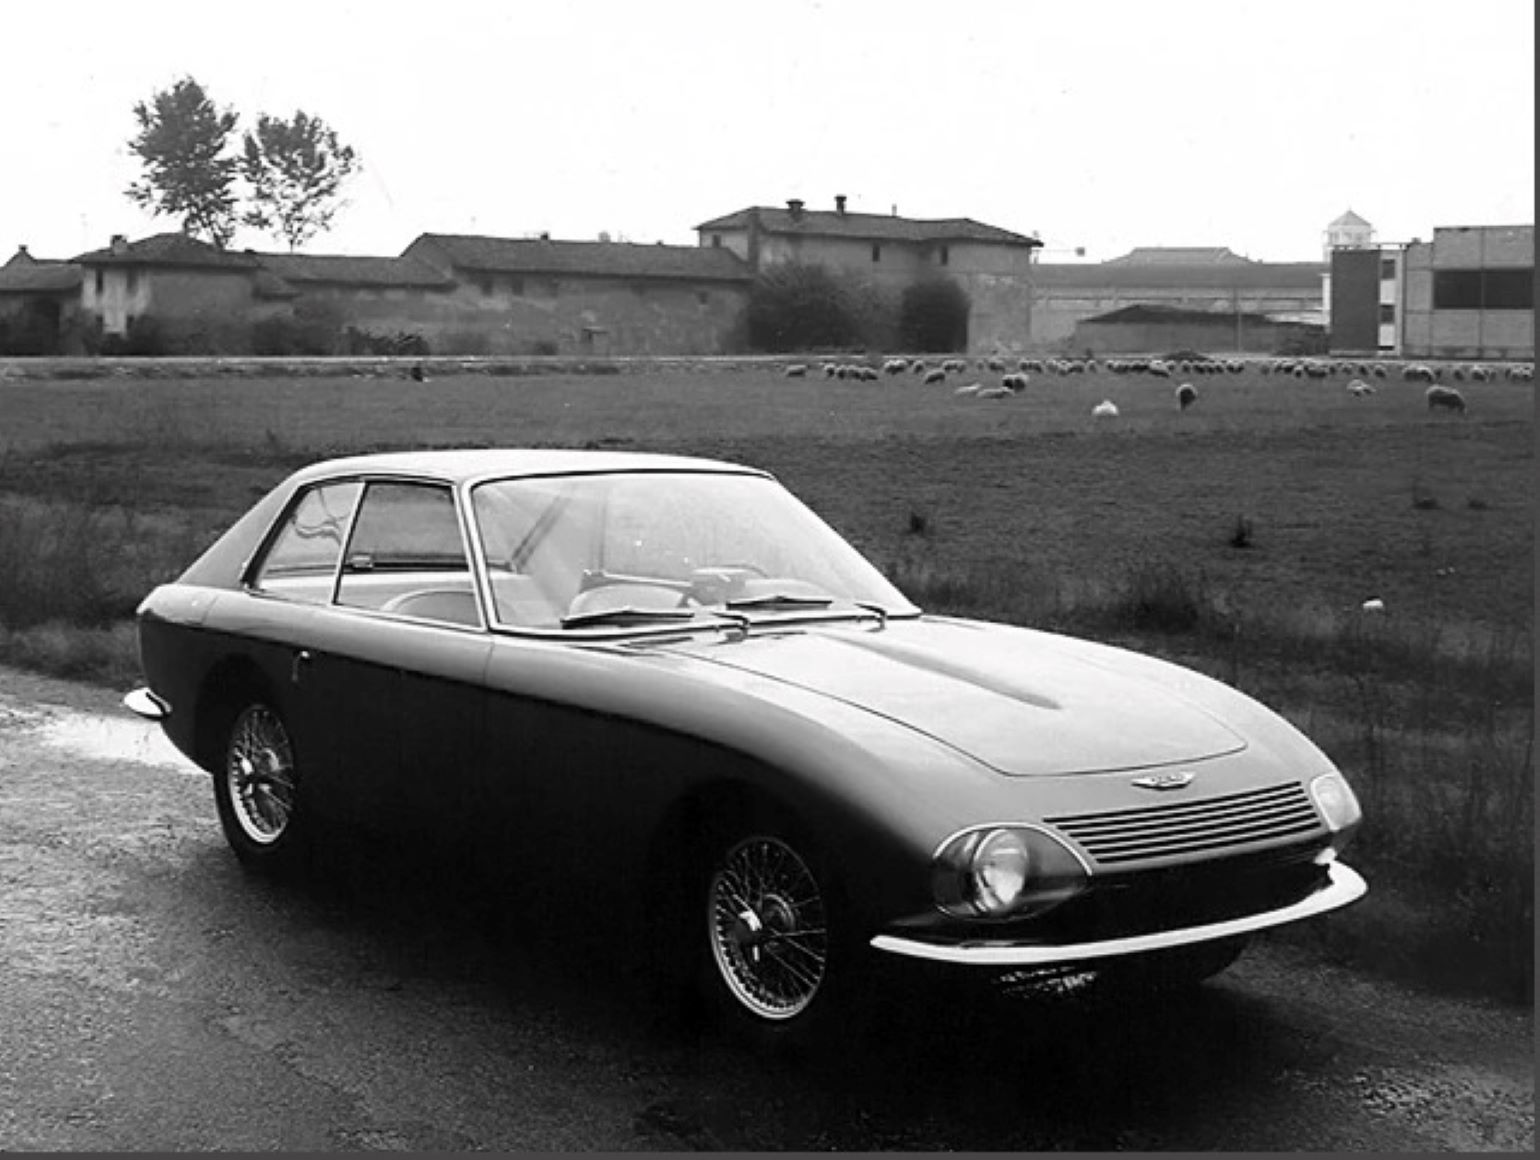 Name:  AH 3000 #2121 AH 3000 Coupe Pininfarina photo front 3-4 arch Classic and Recreation Sportscars.jpg
Views: 213
Size:  171.0 KB